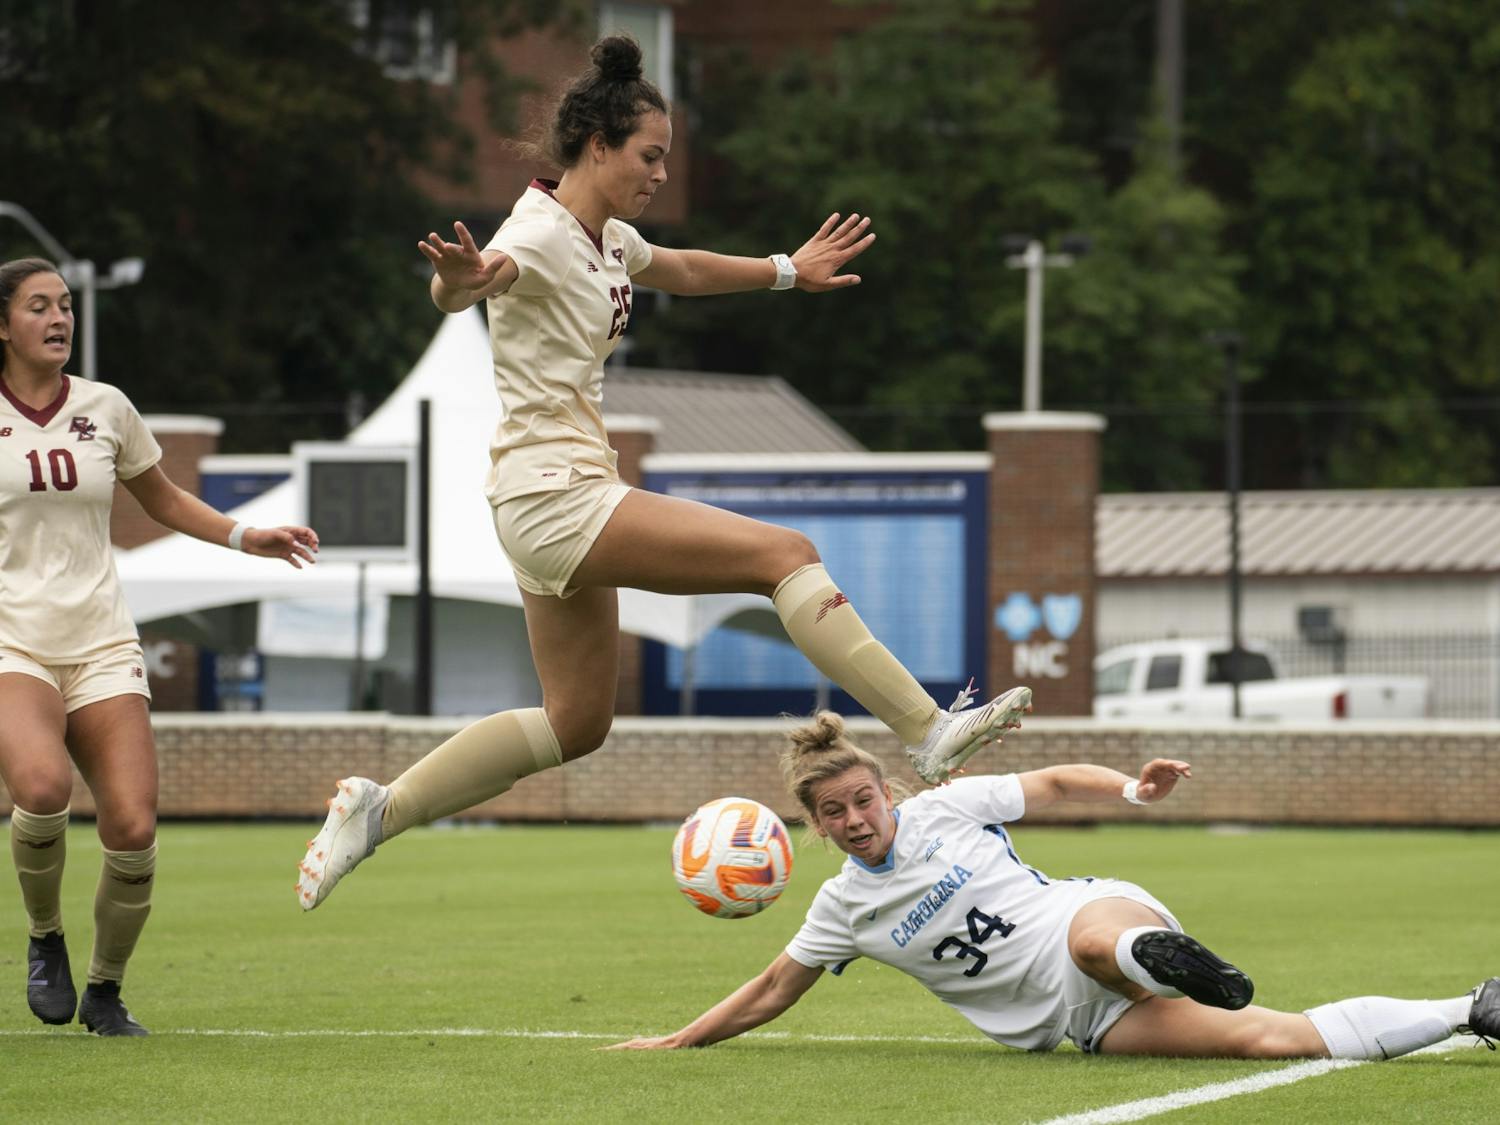 Boston College Sophia Lowenberg, first-year middle, leaps for the ball as UNC Tessa Dellarose, first-year defender/forward, kicks it under her at the Women’s Soccer game at Dorrance Field on Sunday, Sept. 25, 2022.